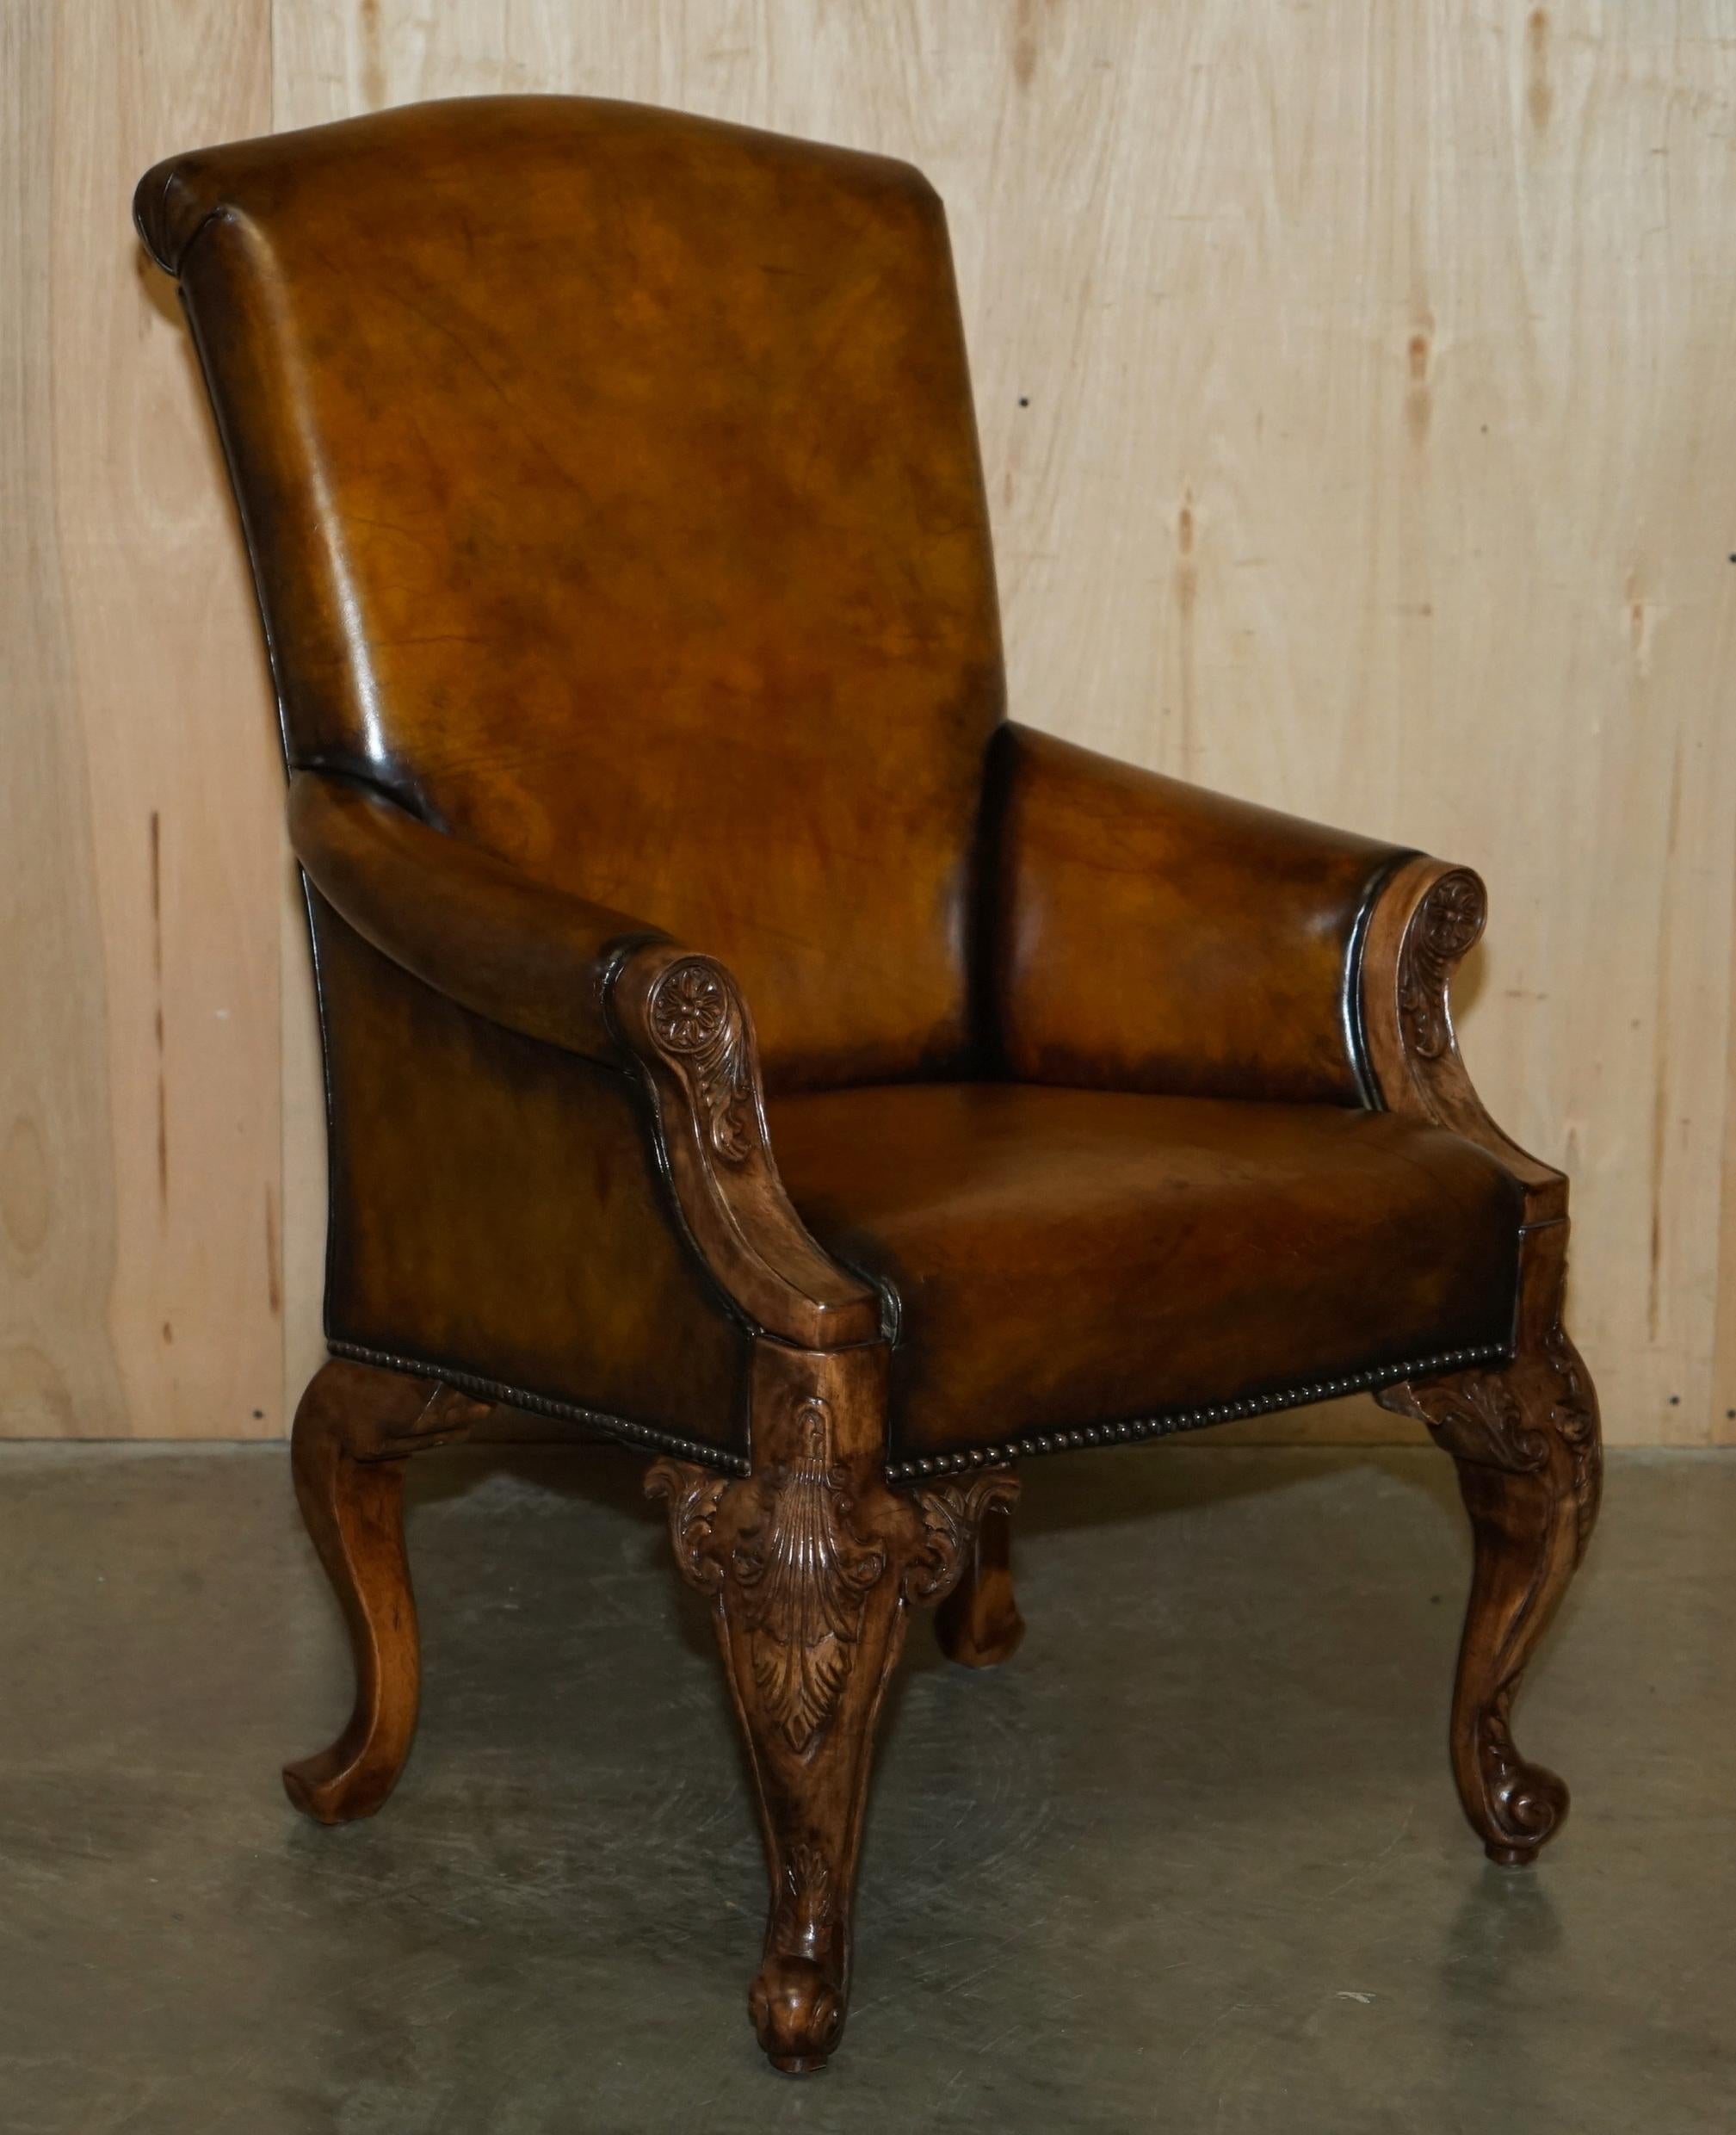 PAIR OF ANTIQUE HEAVILY CARved HAND DYED BROWN LEATHER RESTORED THRONE ARMCHAIRs im Angebot 8